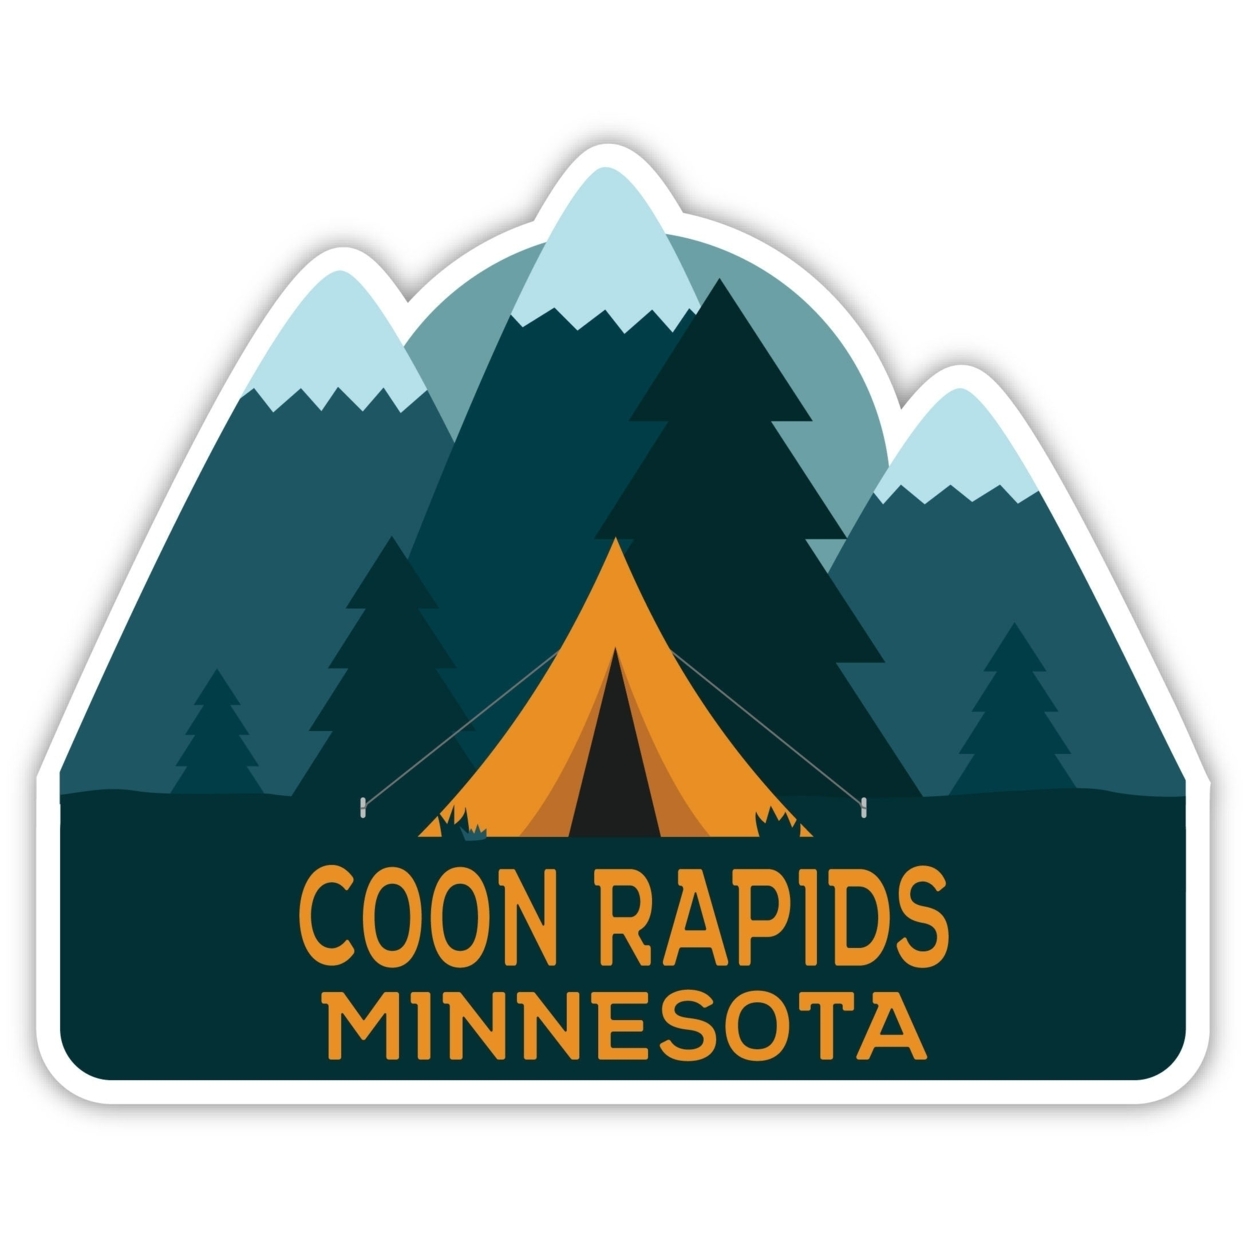 Coon Rapids Minnesota Souvenir Decorative Stickers (Choose Theme And Size) - 4-Pack, 4-Inch, Tent